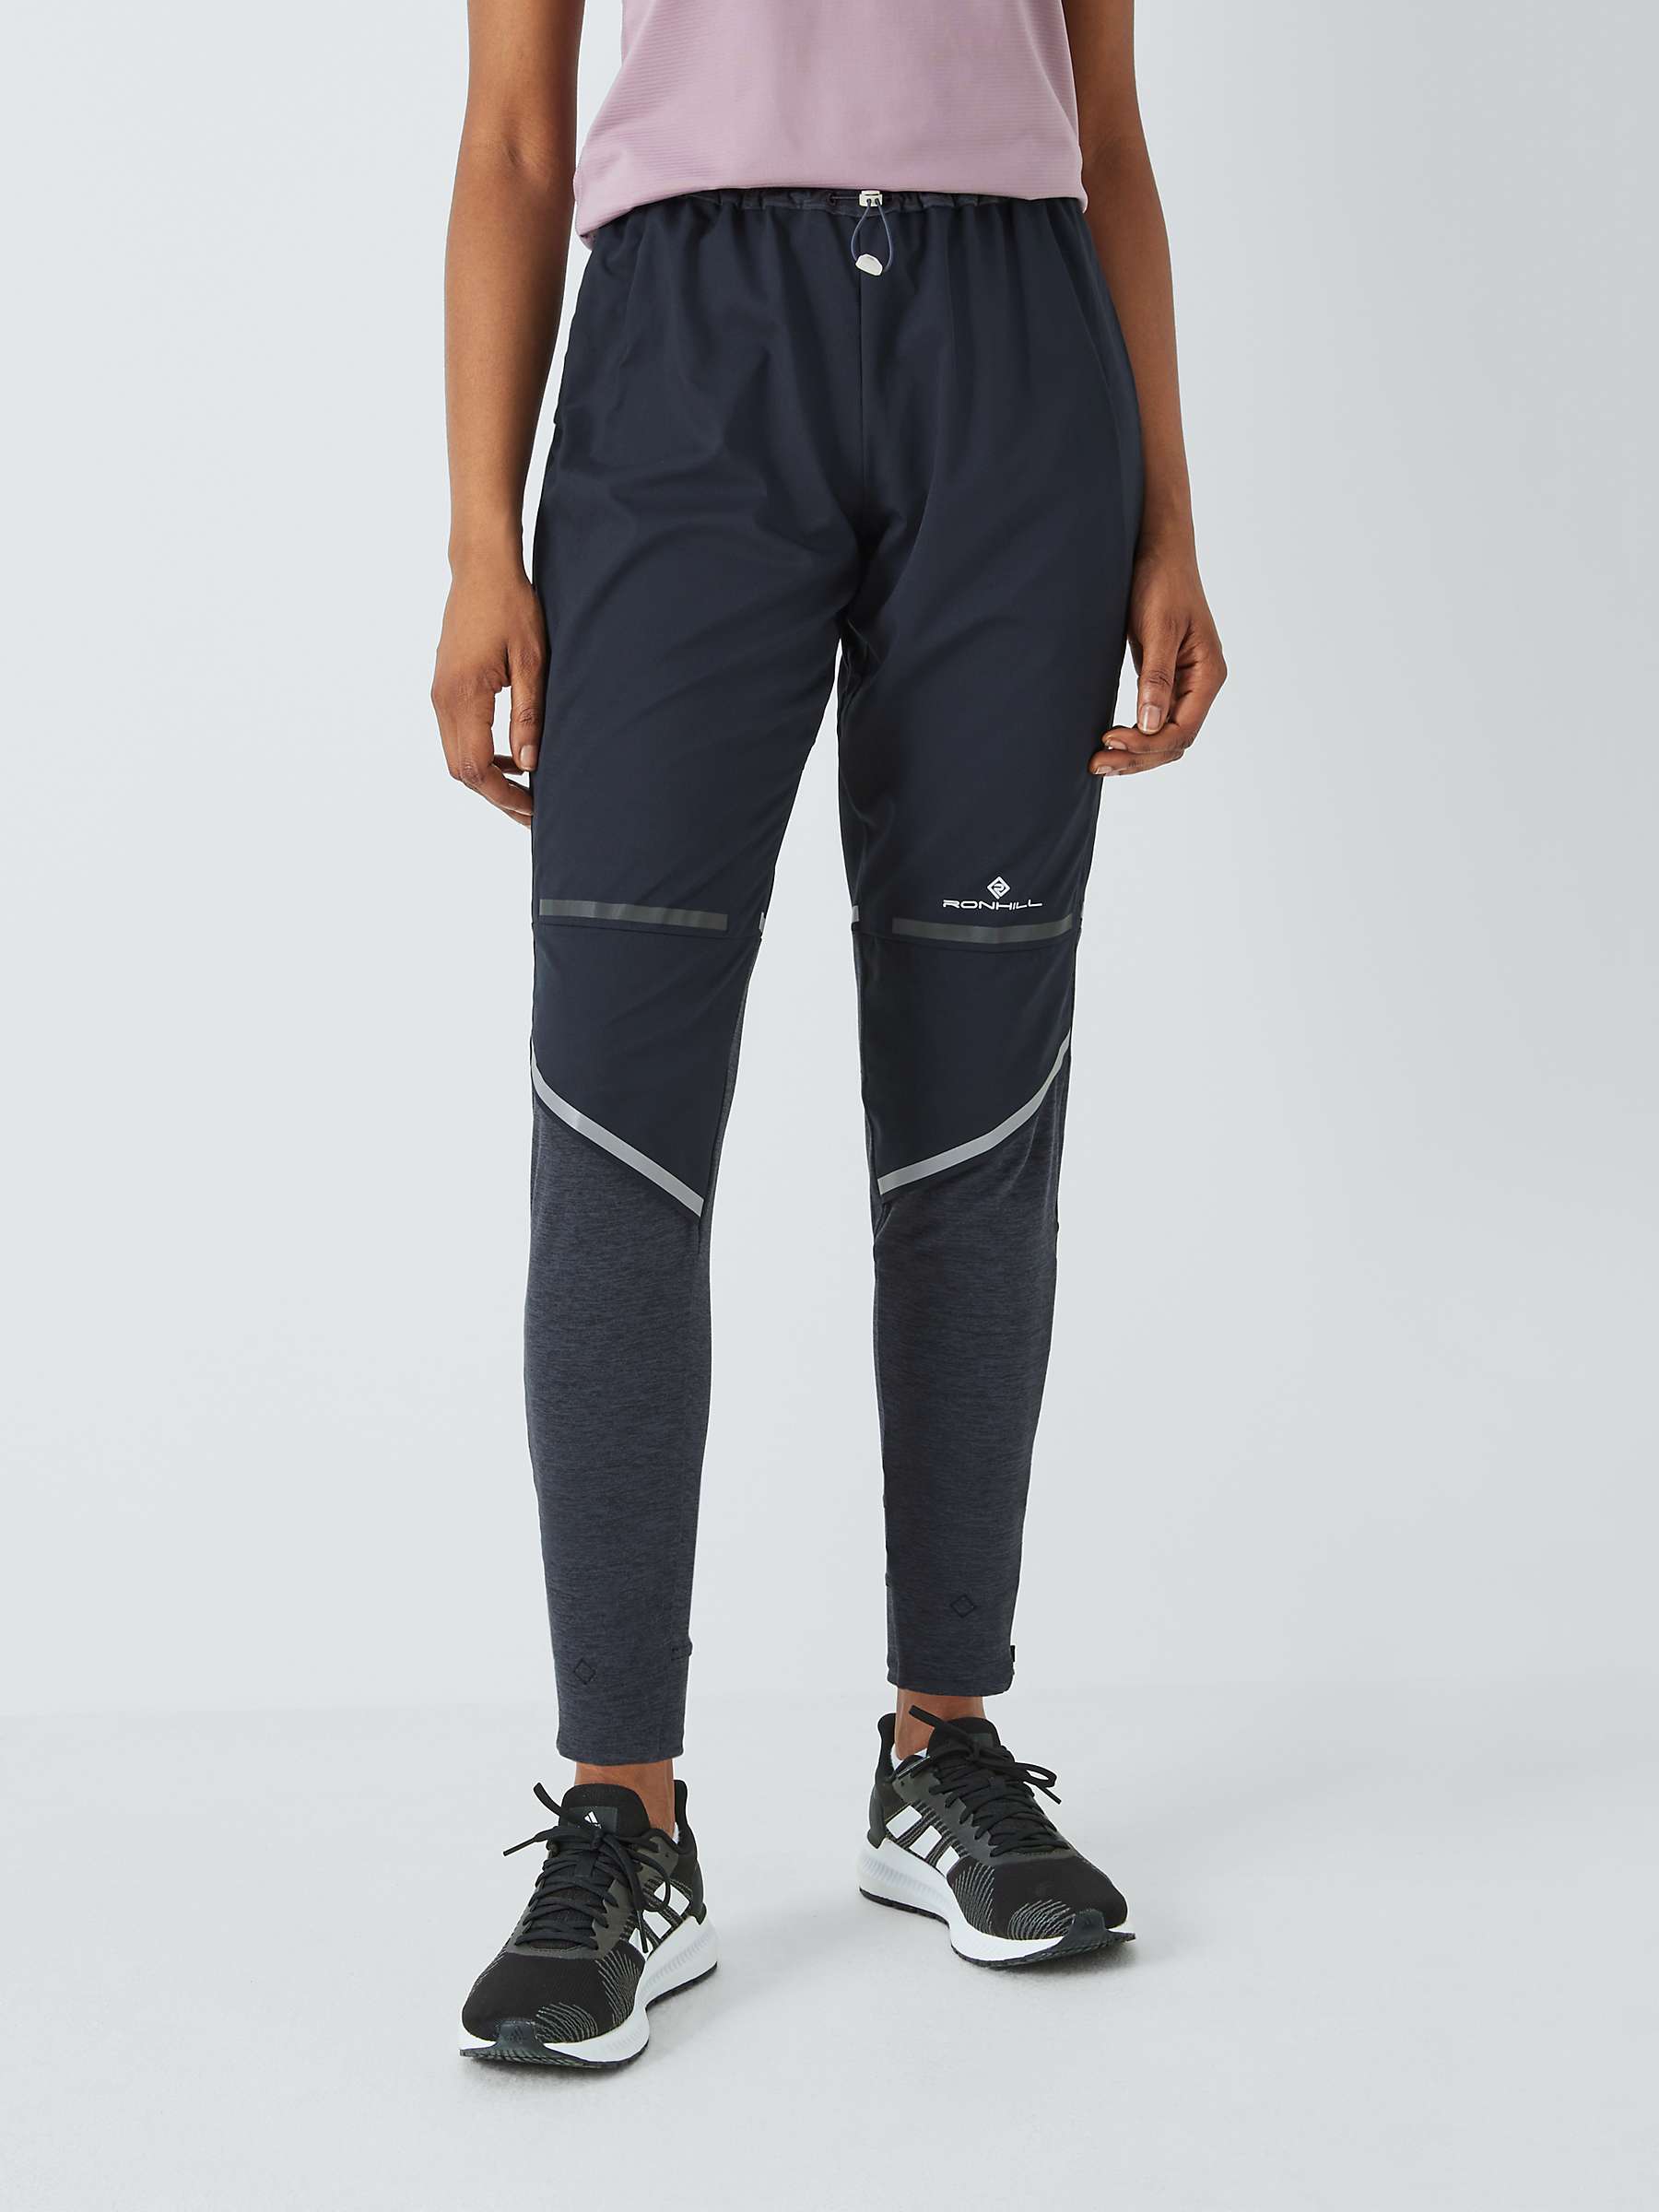 Buy Ronhill Running Slim Fit Trousers, Black/Charcoal Marl Online at johnlewis.com